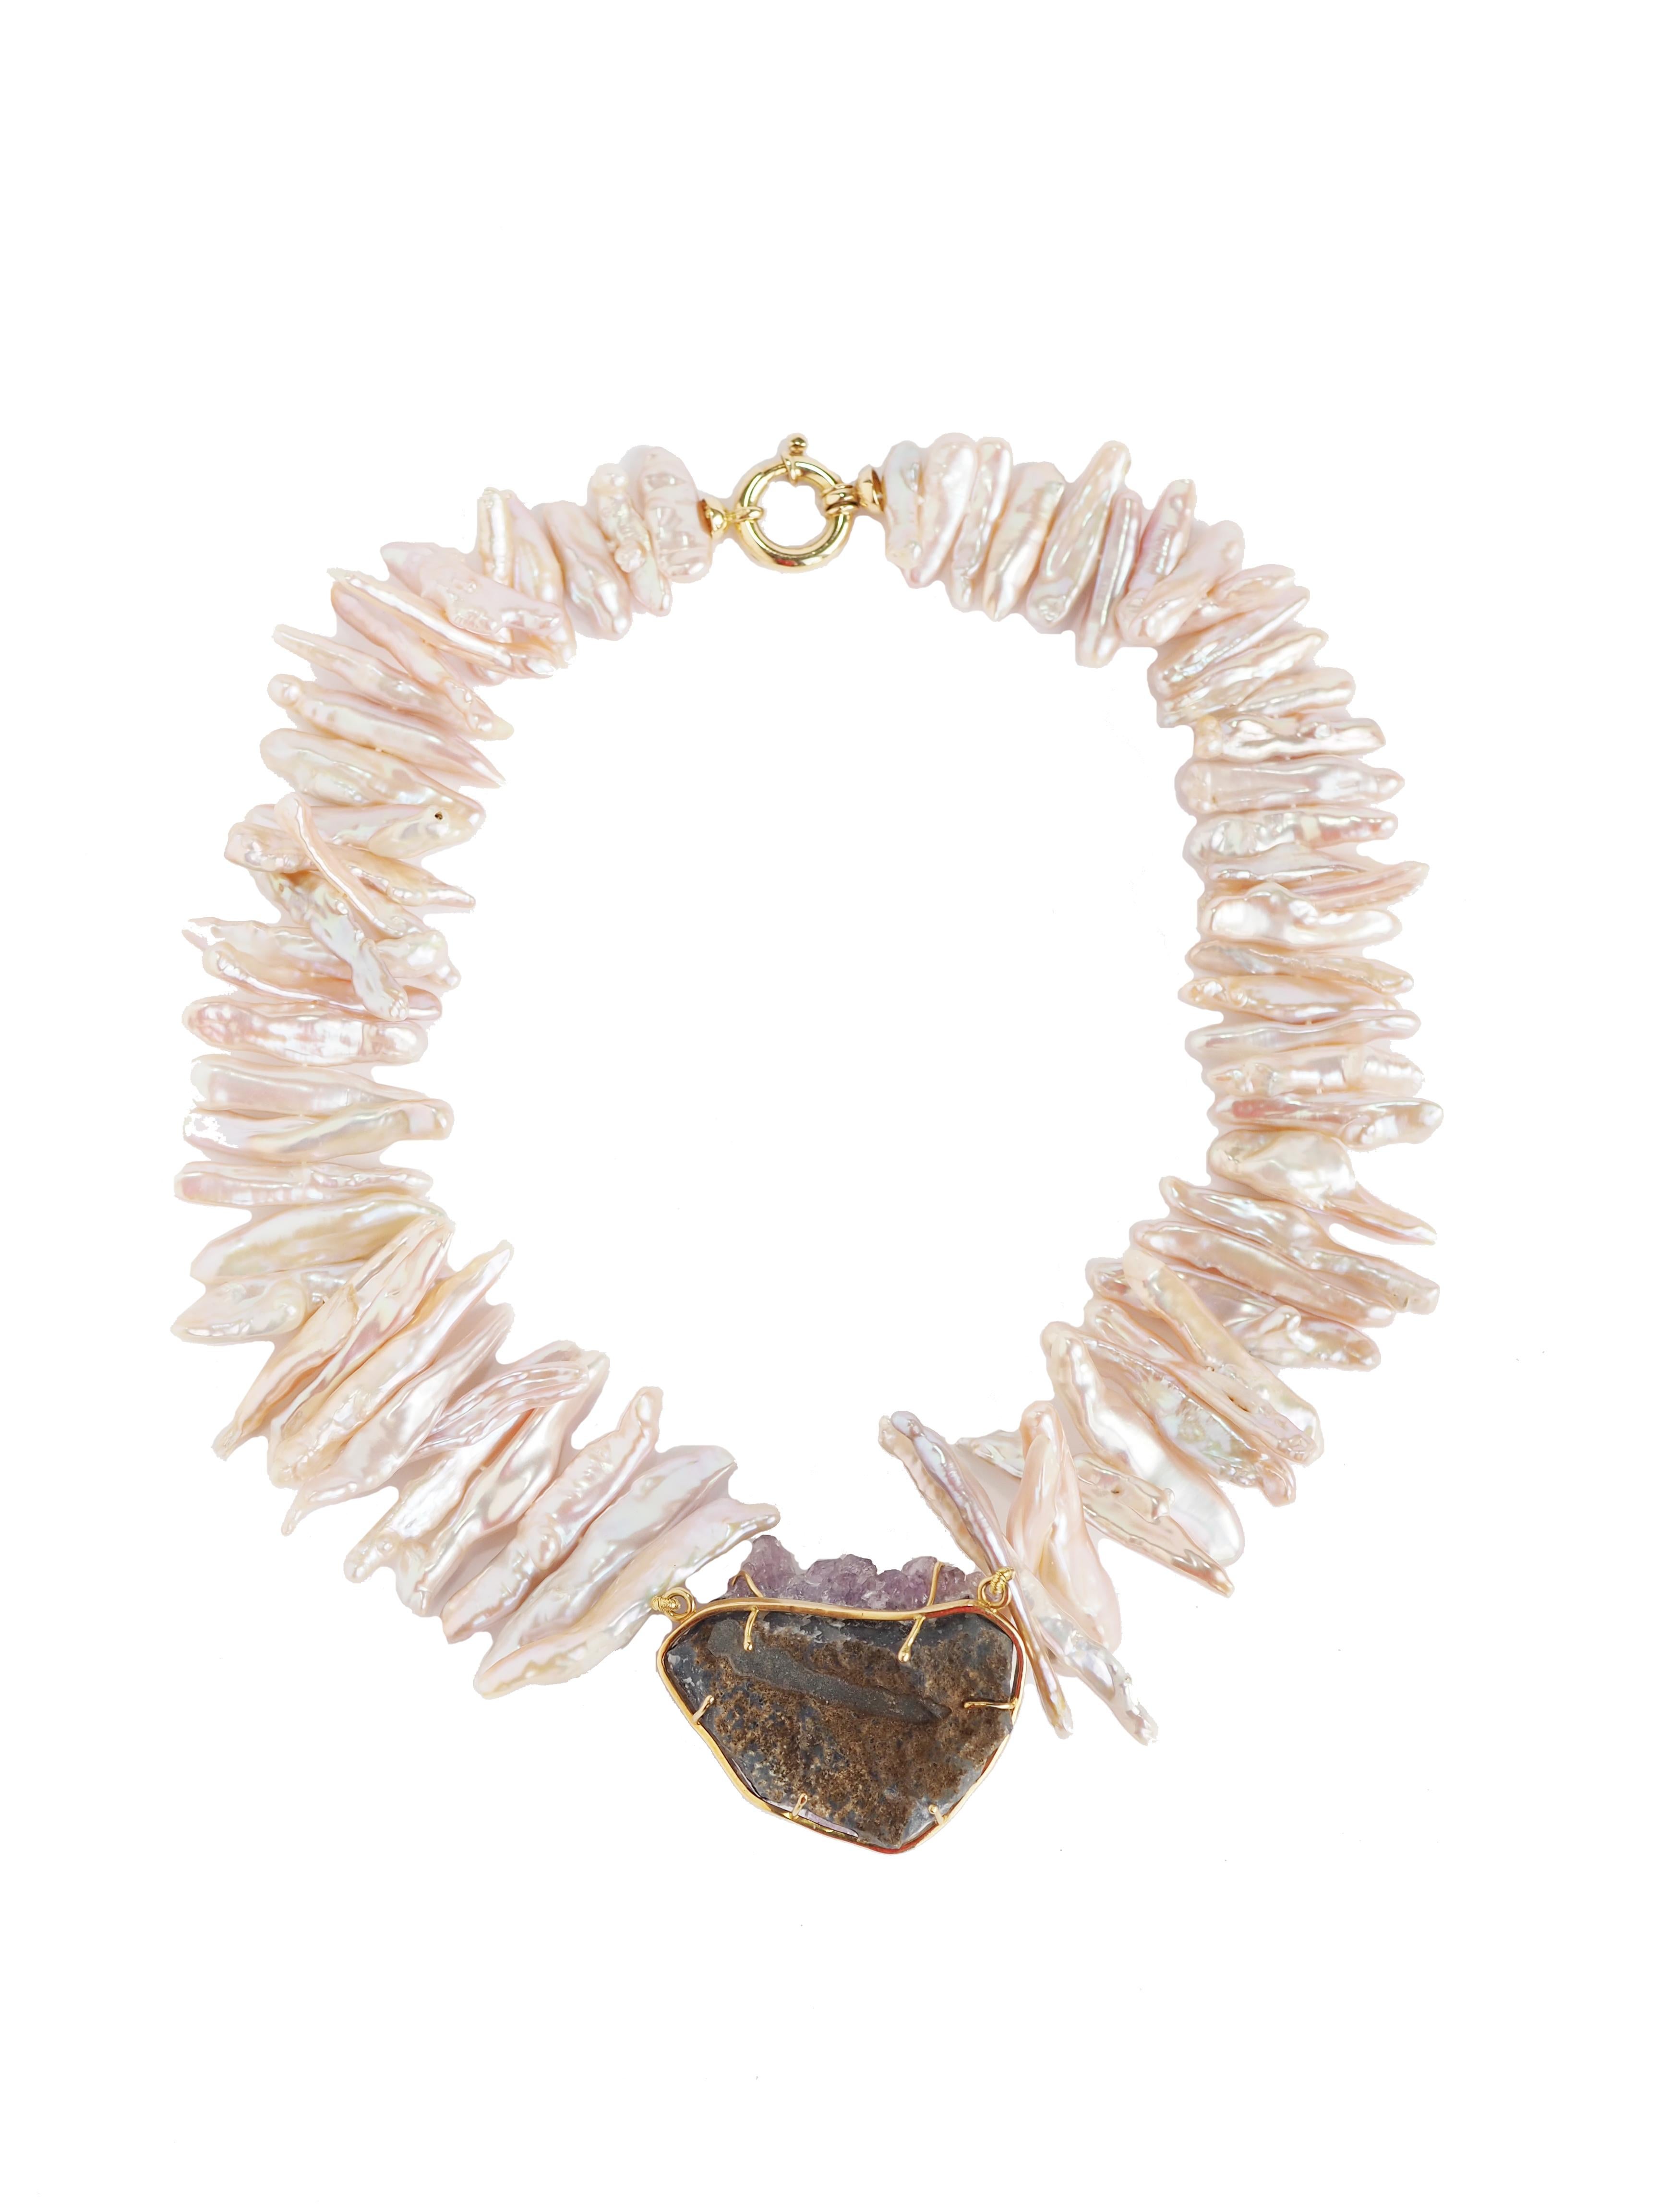 Special rose Biwa natural pearls coming from Japan very rare one, crystal druzy amethyst gold 18kt gr 8,70. Total length 45 cm.
All Giulia Colussi jewelry is new and has never been previously owned or worn. Each item will arrive at your door